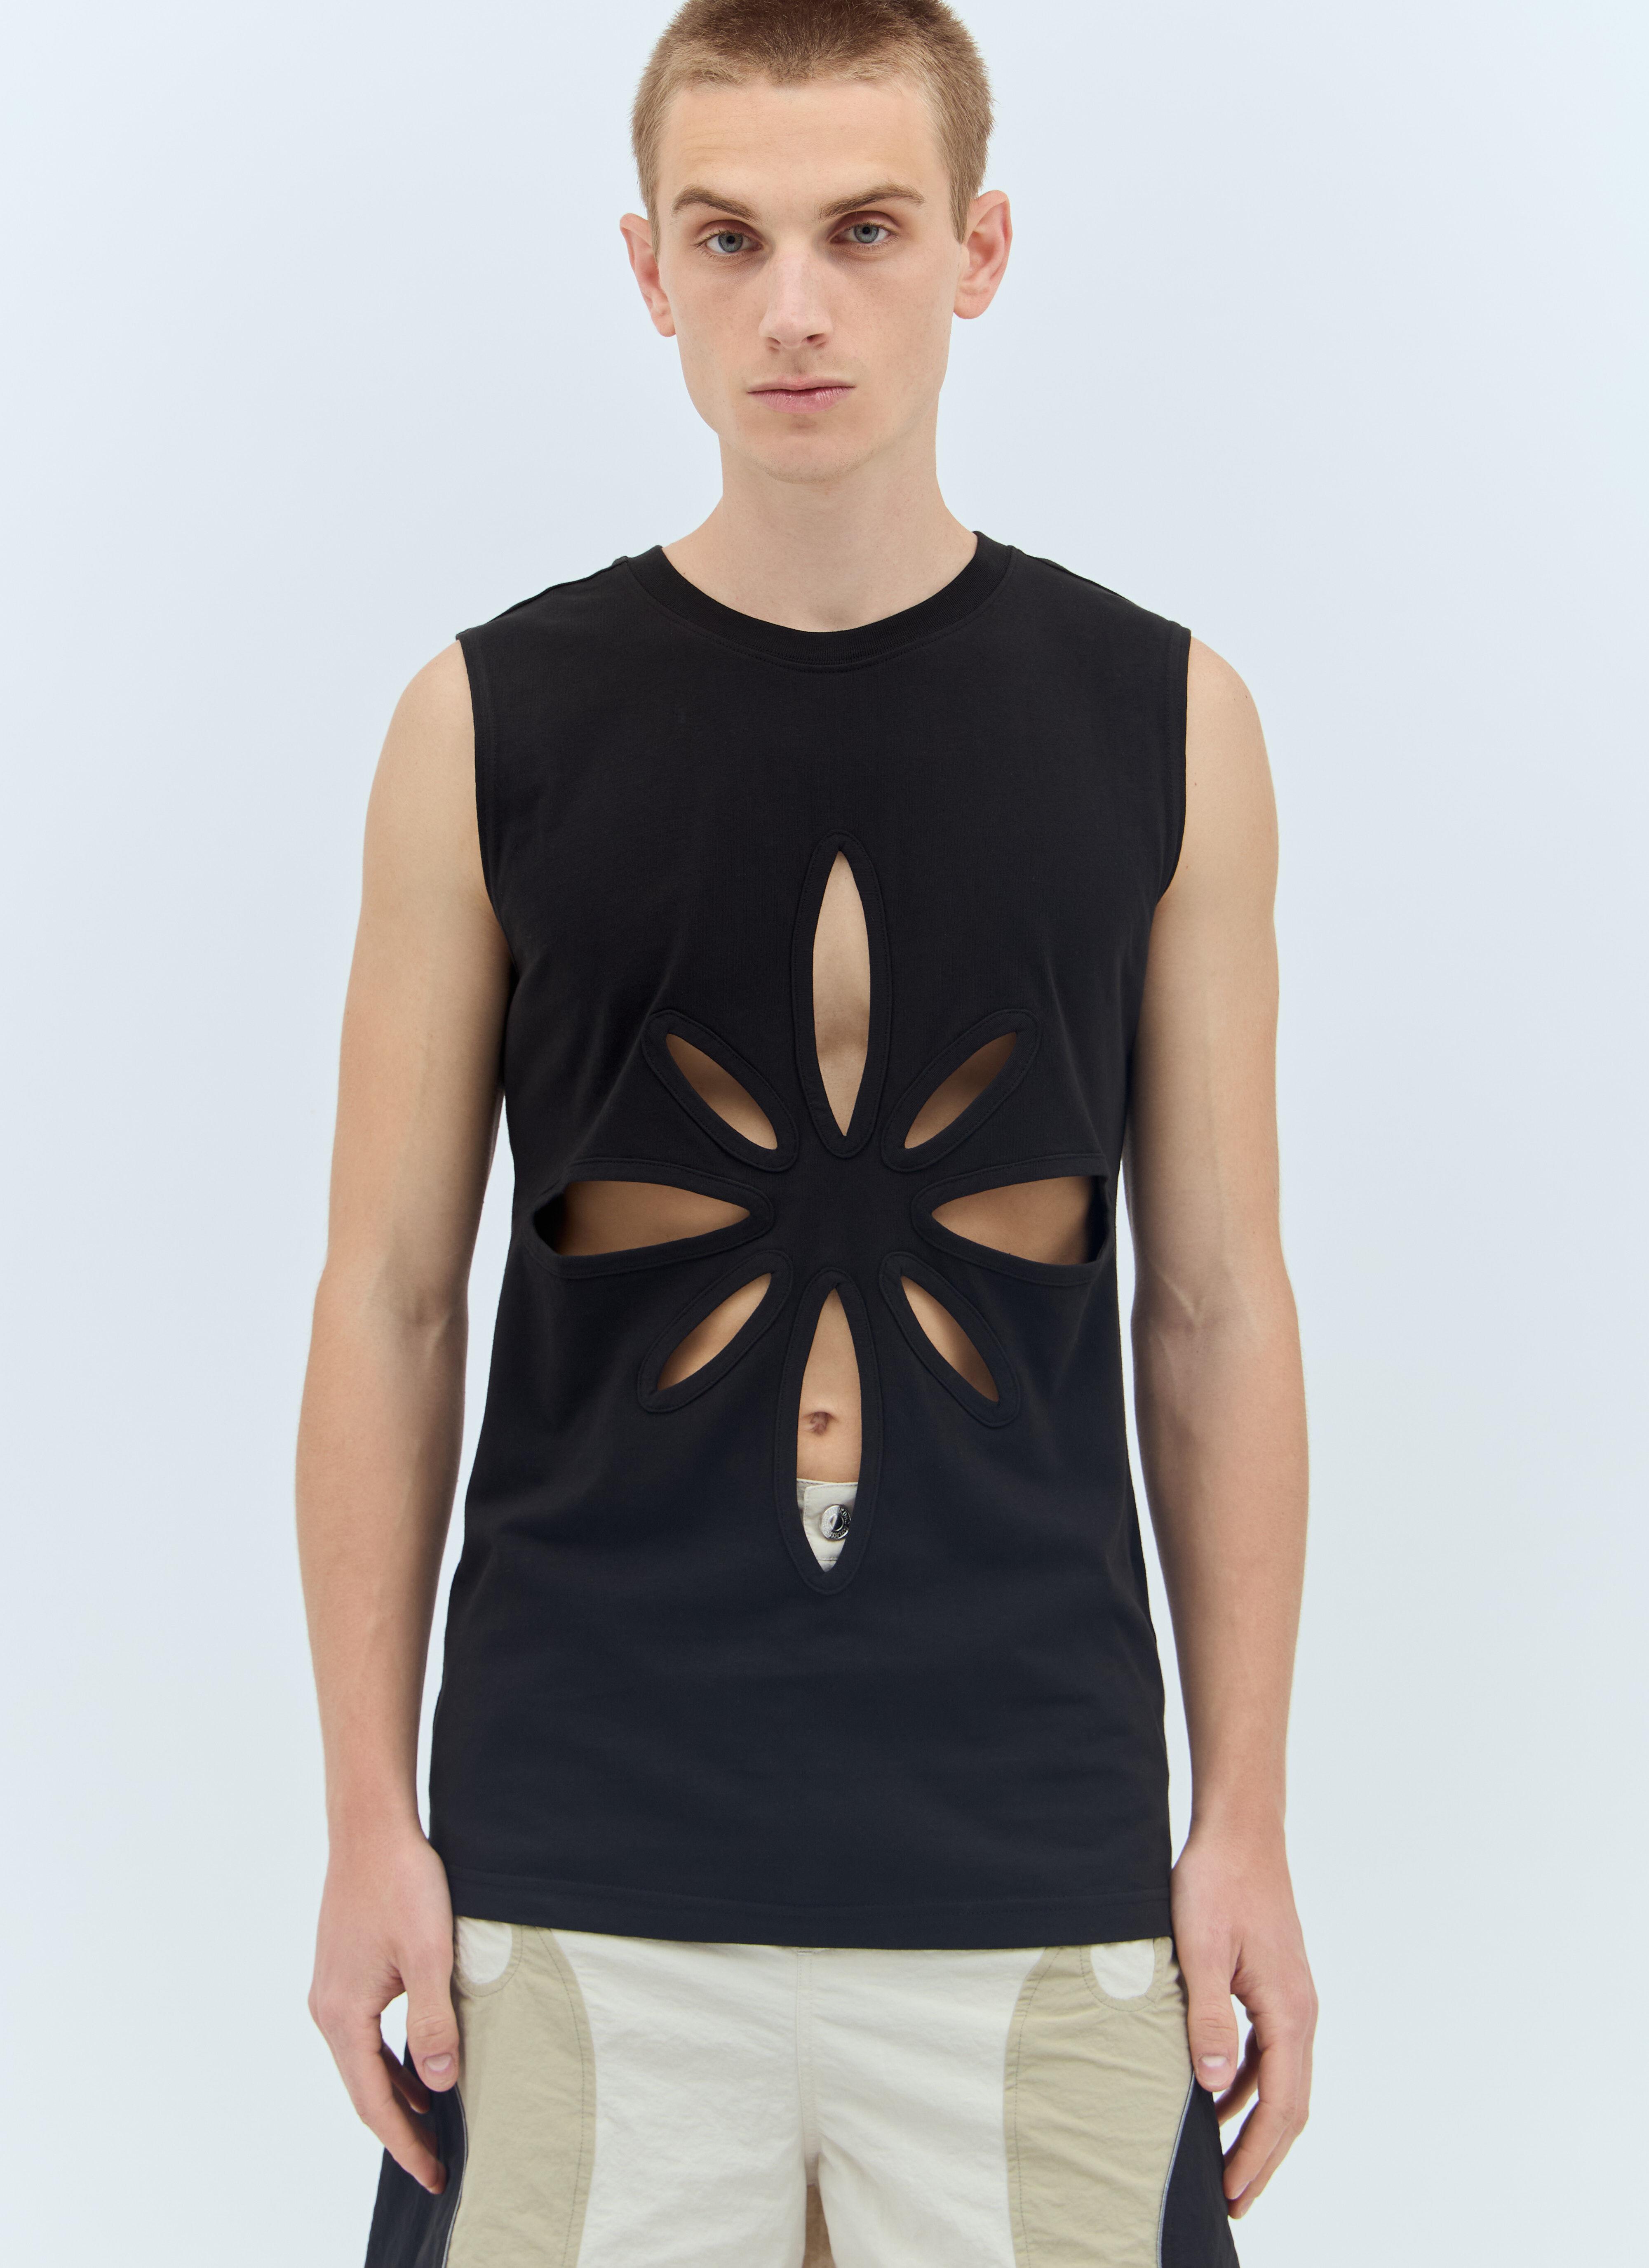 Rick Owens x Champion Origami Cut-Out Sleeveless Top Black roc0157002